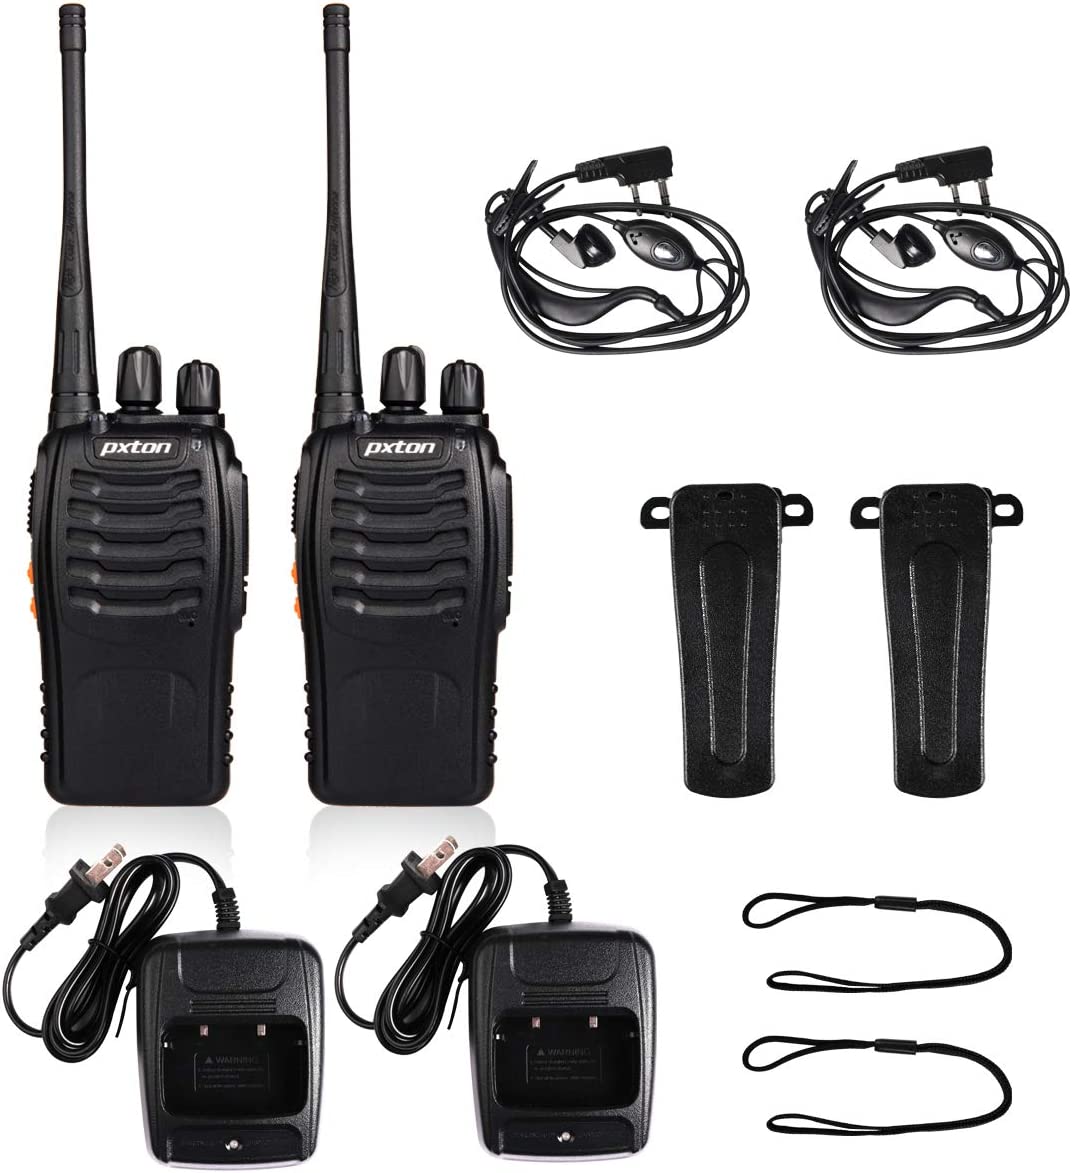 Pxton Walkie Talkie Black Rechargeable Long Range Two Way Radios with Earpieces 2